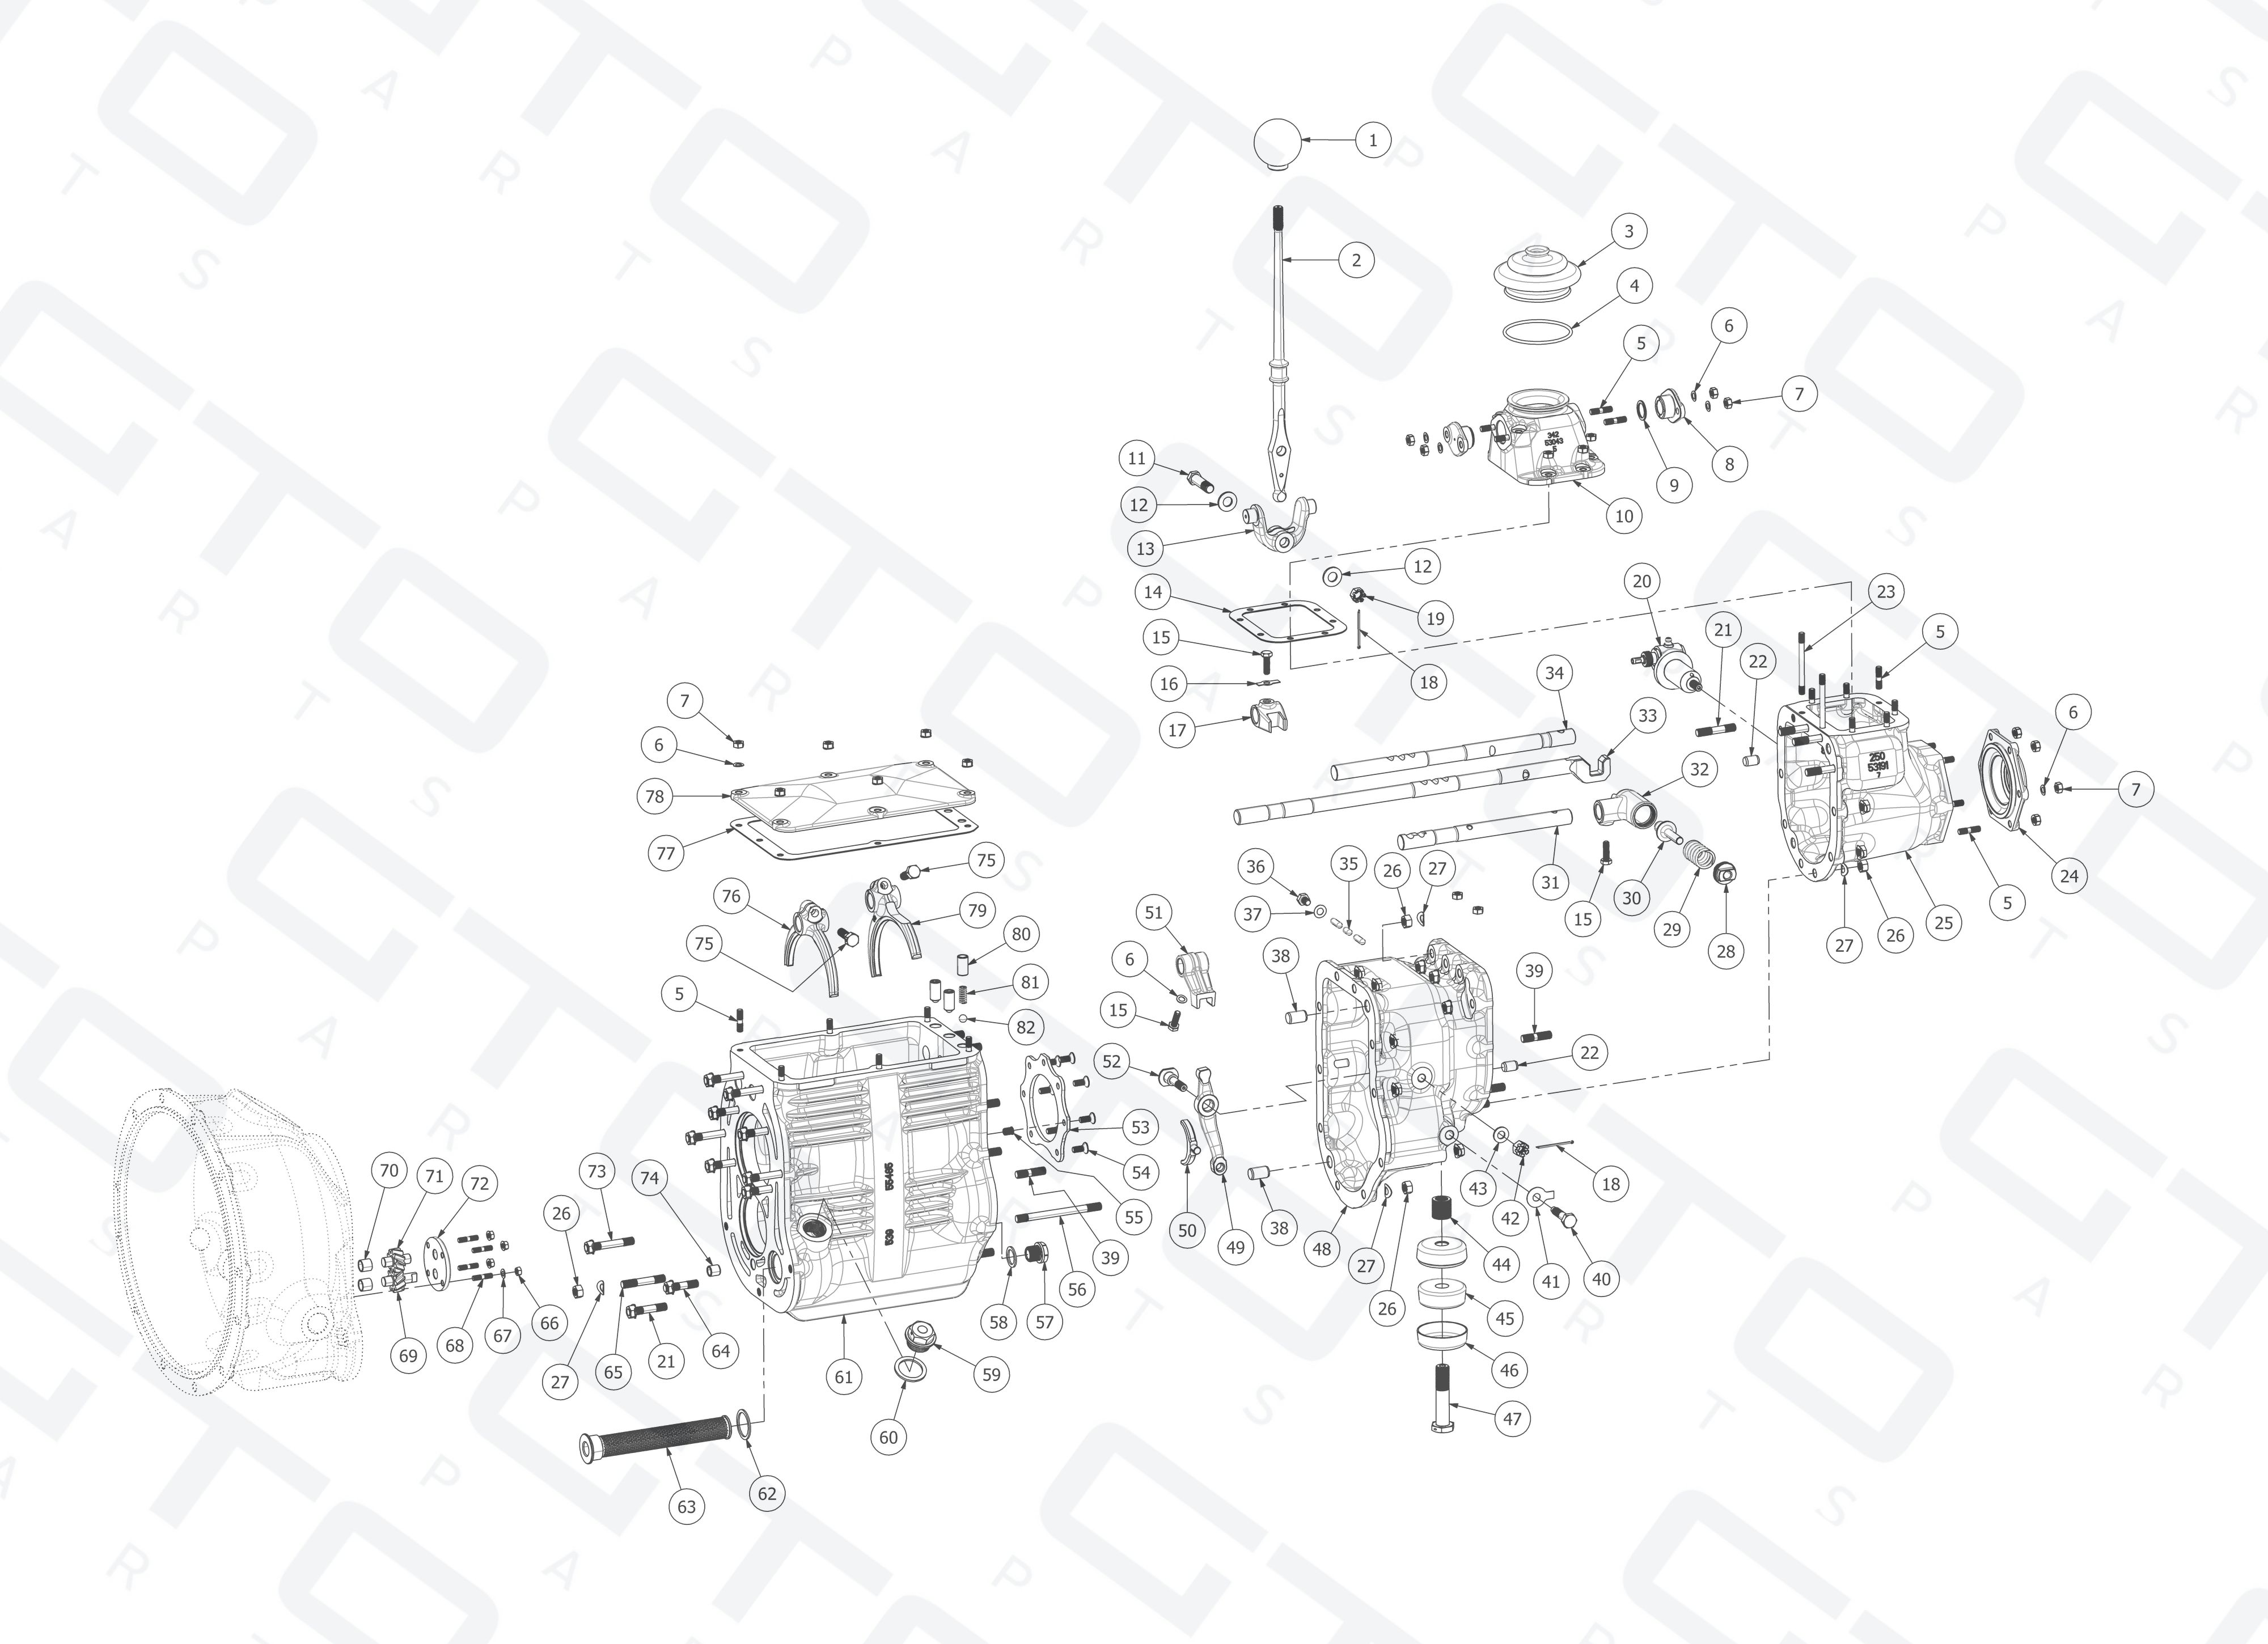 Schematic: Gearbox Assembly